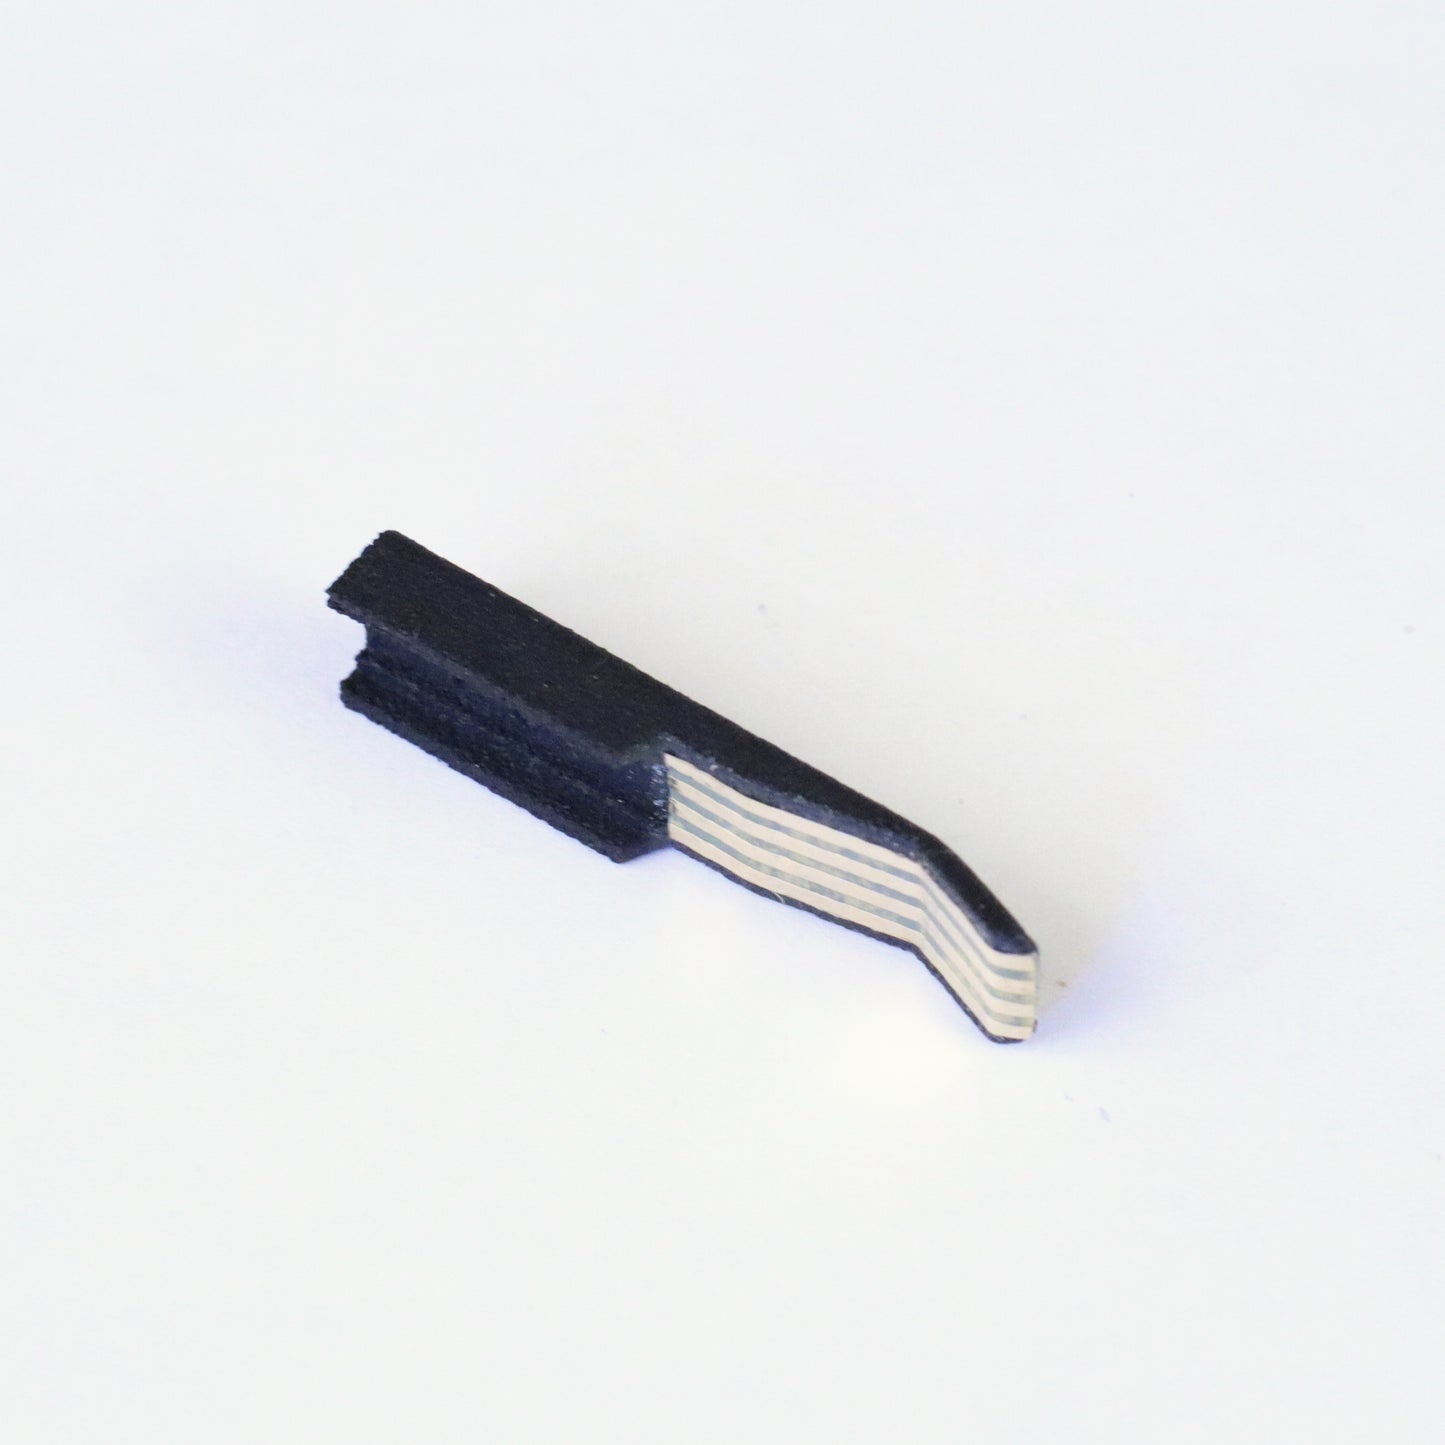 MMC Cartridge Mounting Tab for Beogram 4000, 4002, and 4004